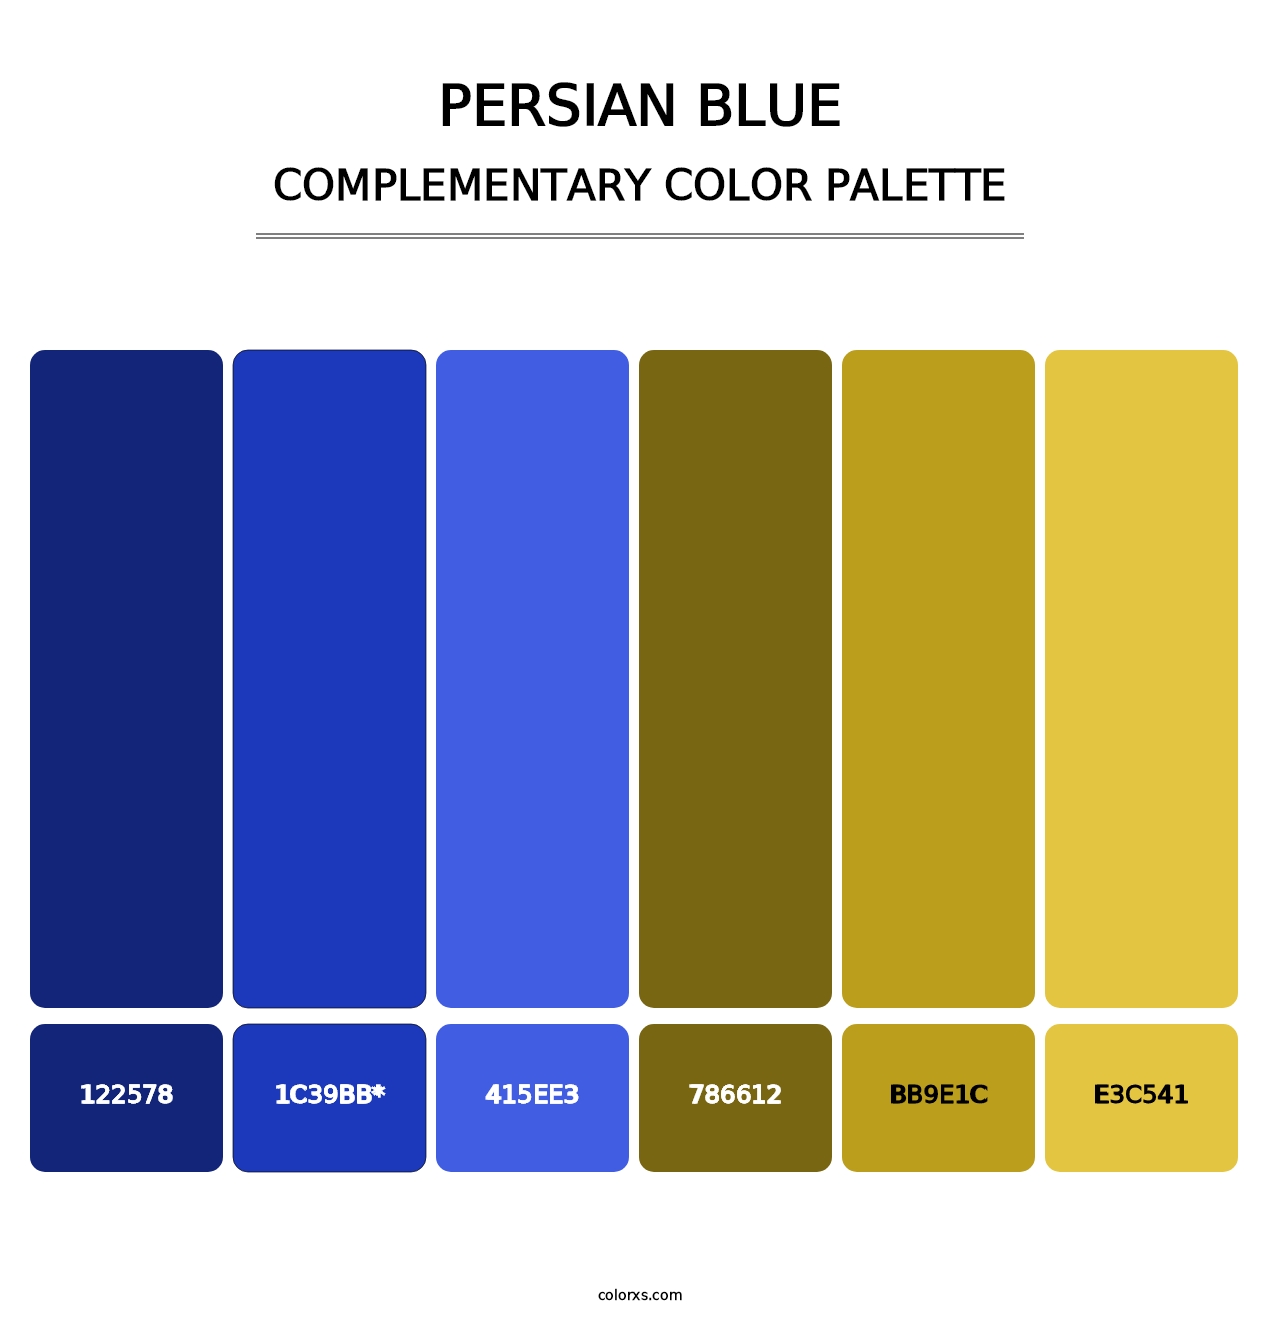 Persian Blue - Complementary Color Palette